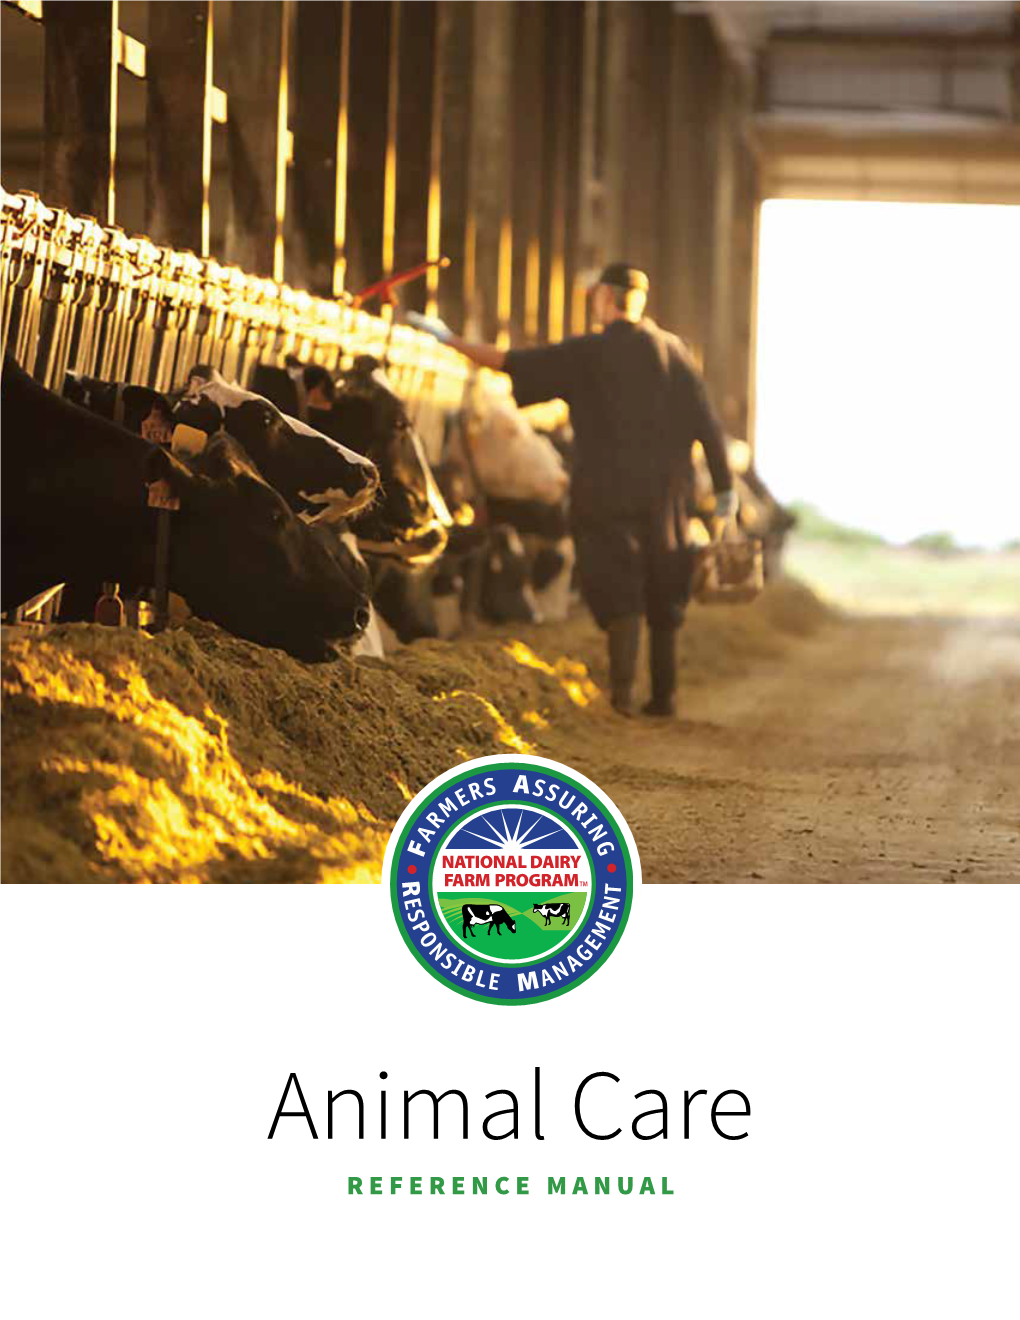 Animal Care REFERENCE MANUAL